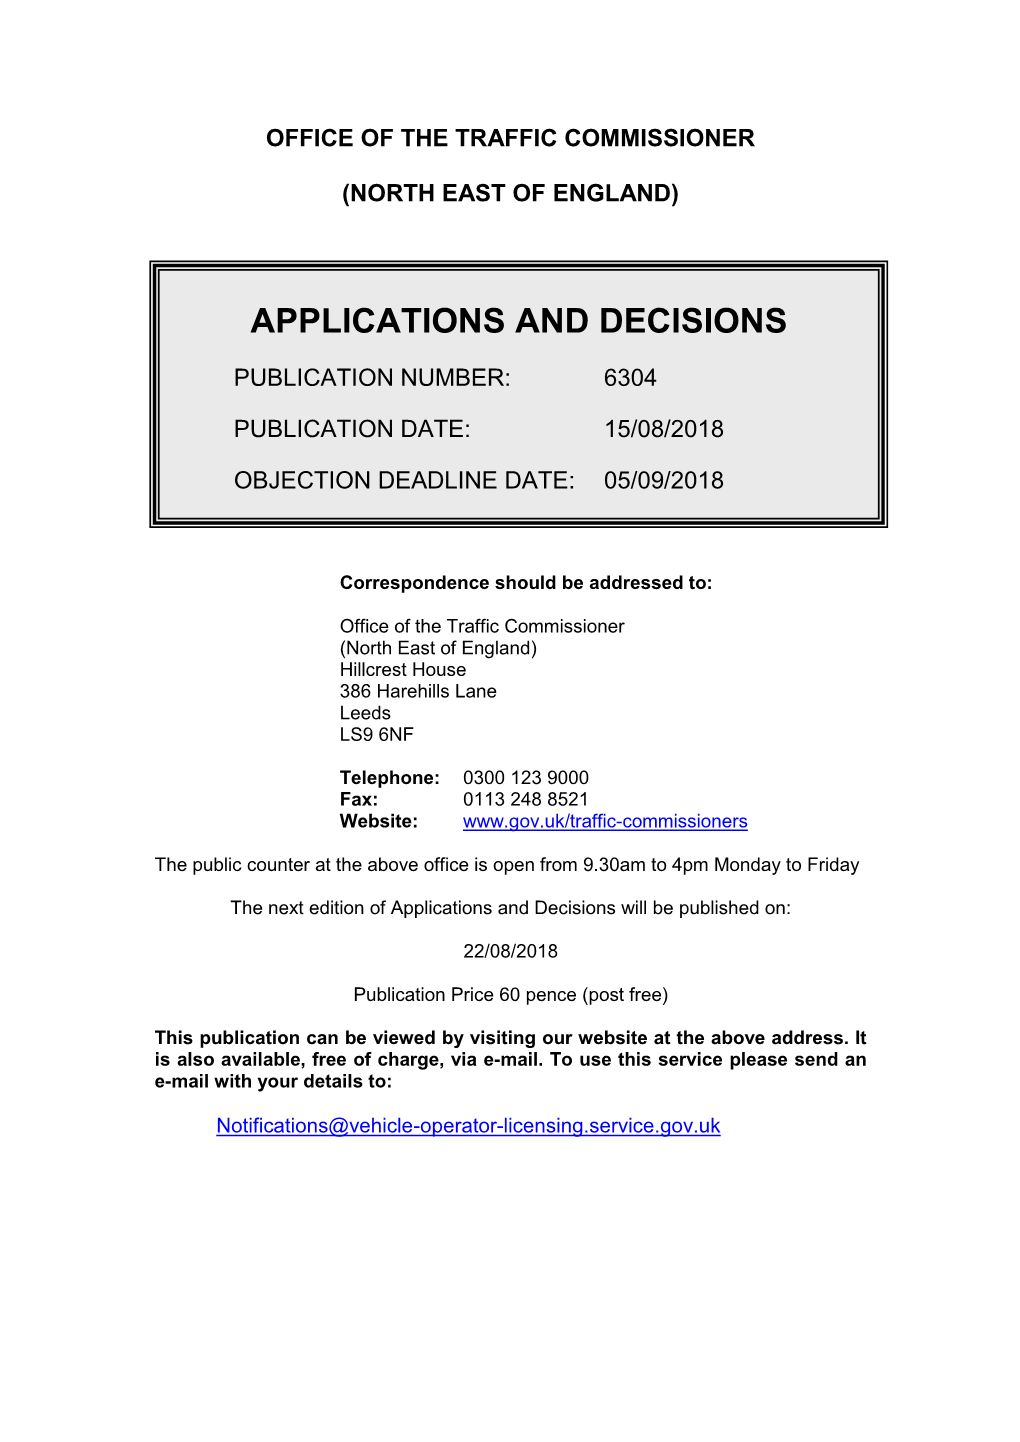 Applications and Decisions for the North East of England